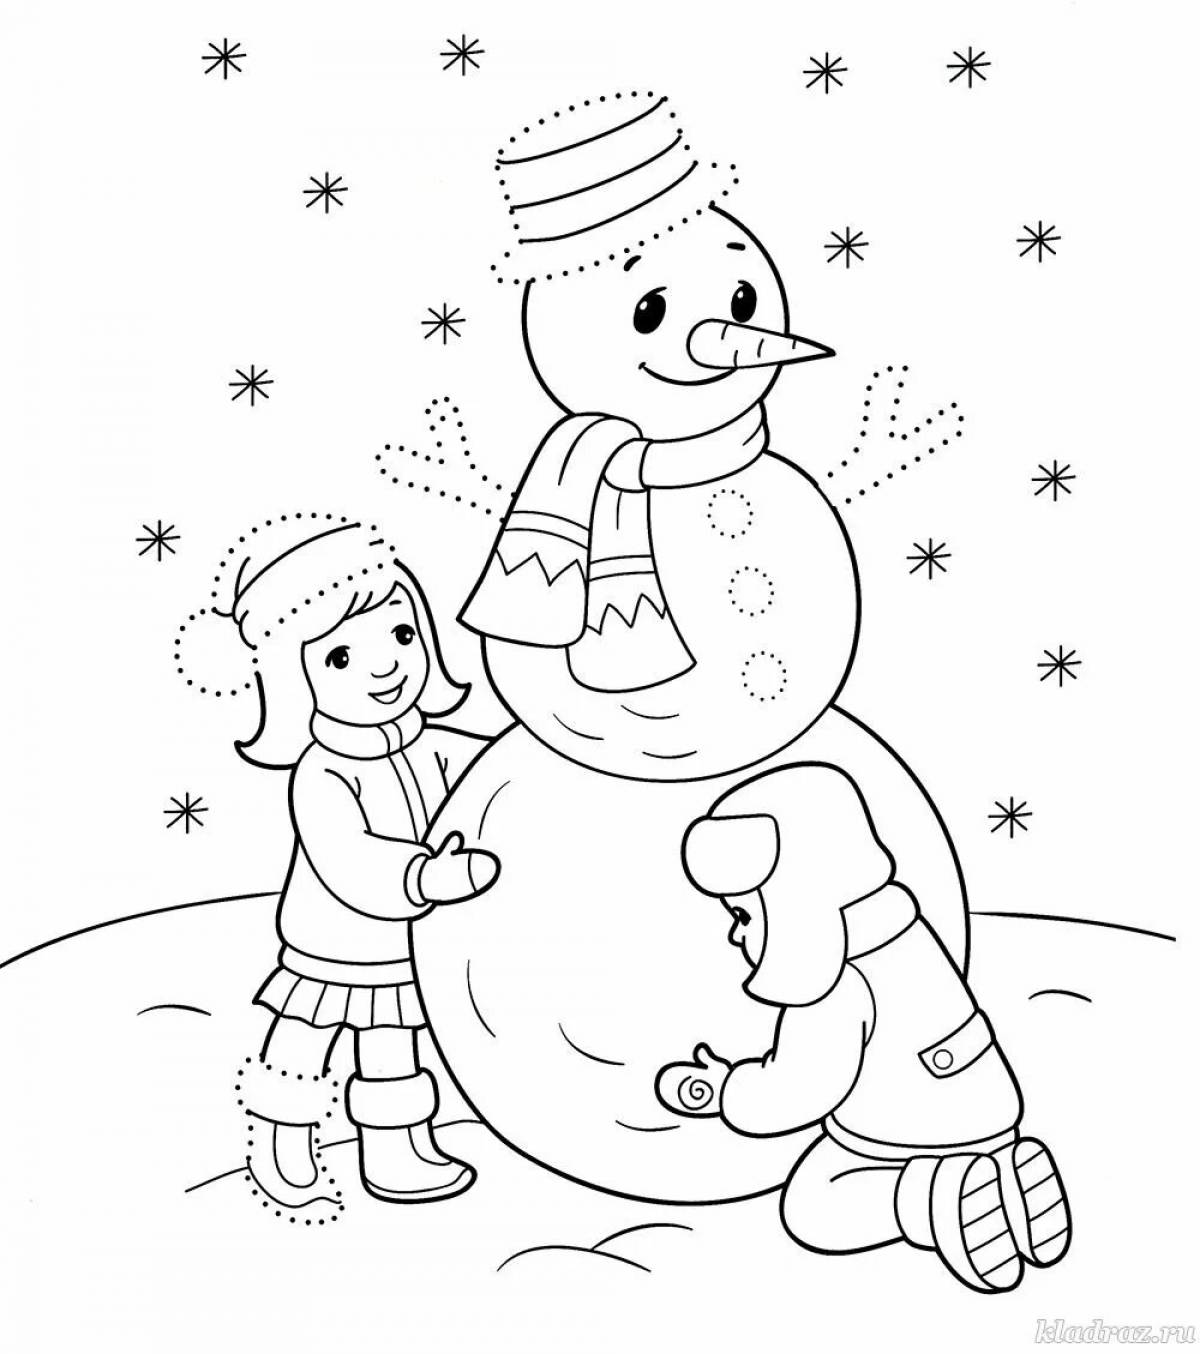 Exciting winter coloring book for 3-4 year olds